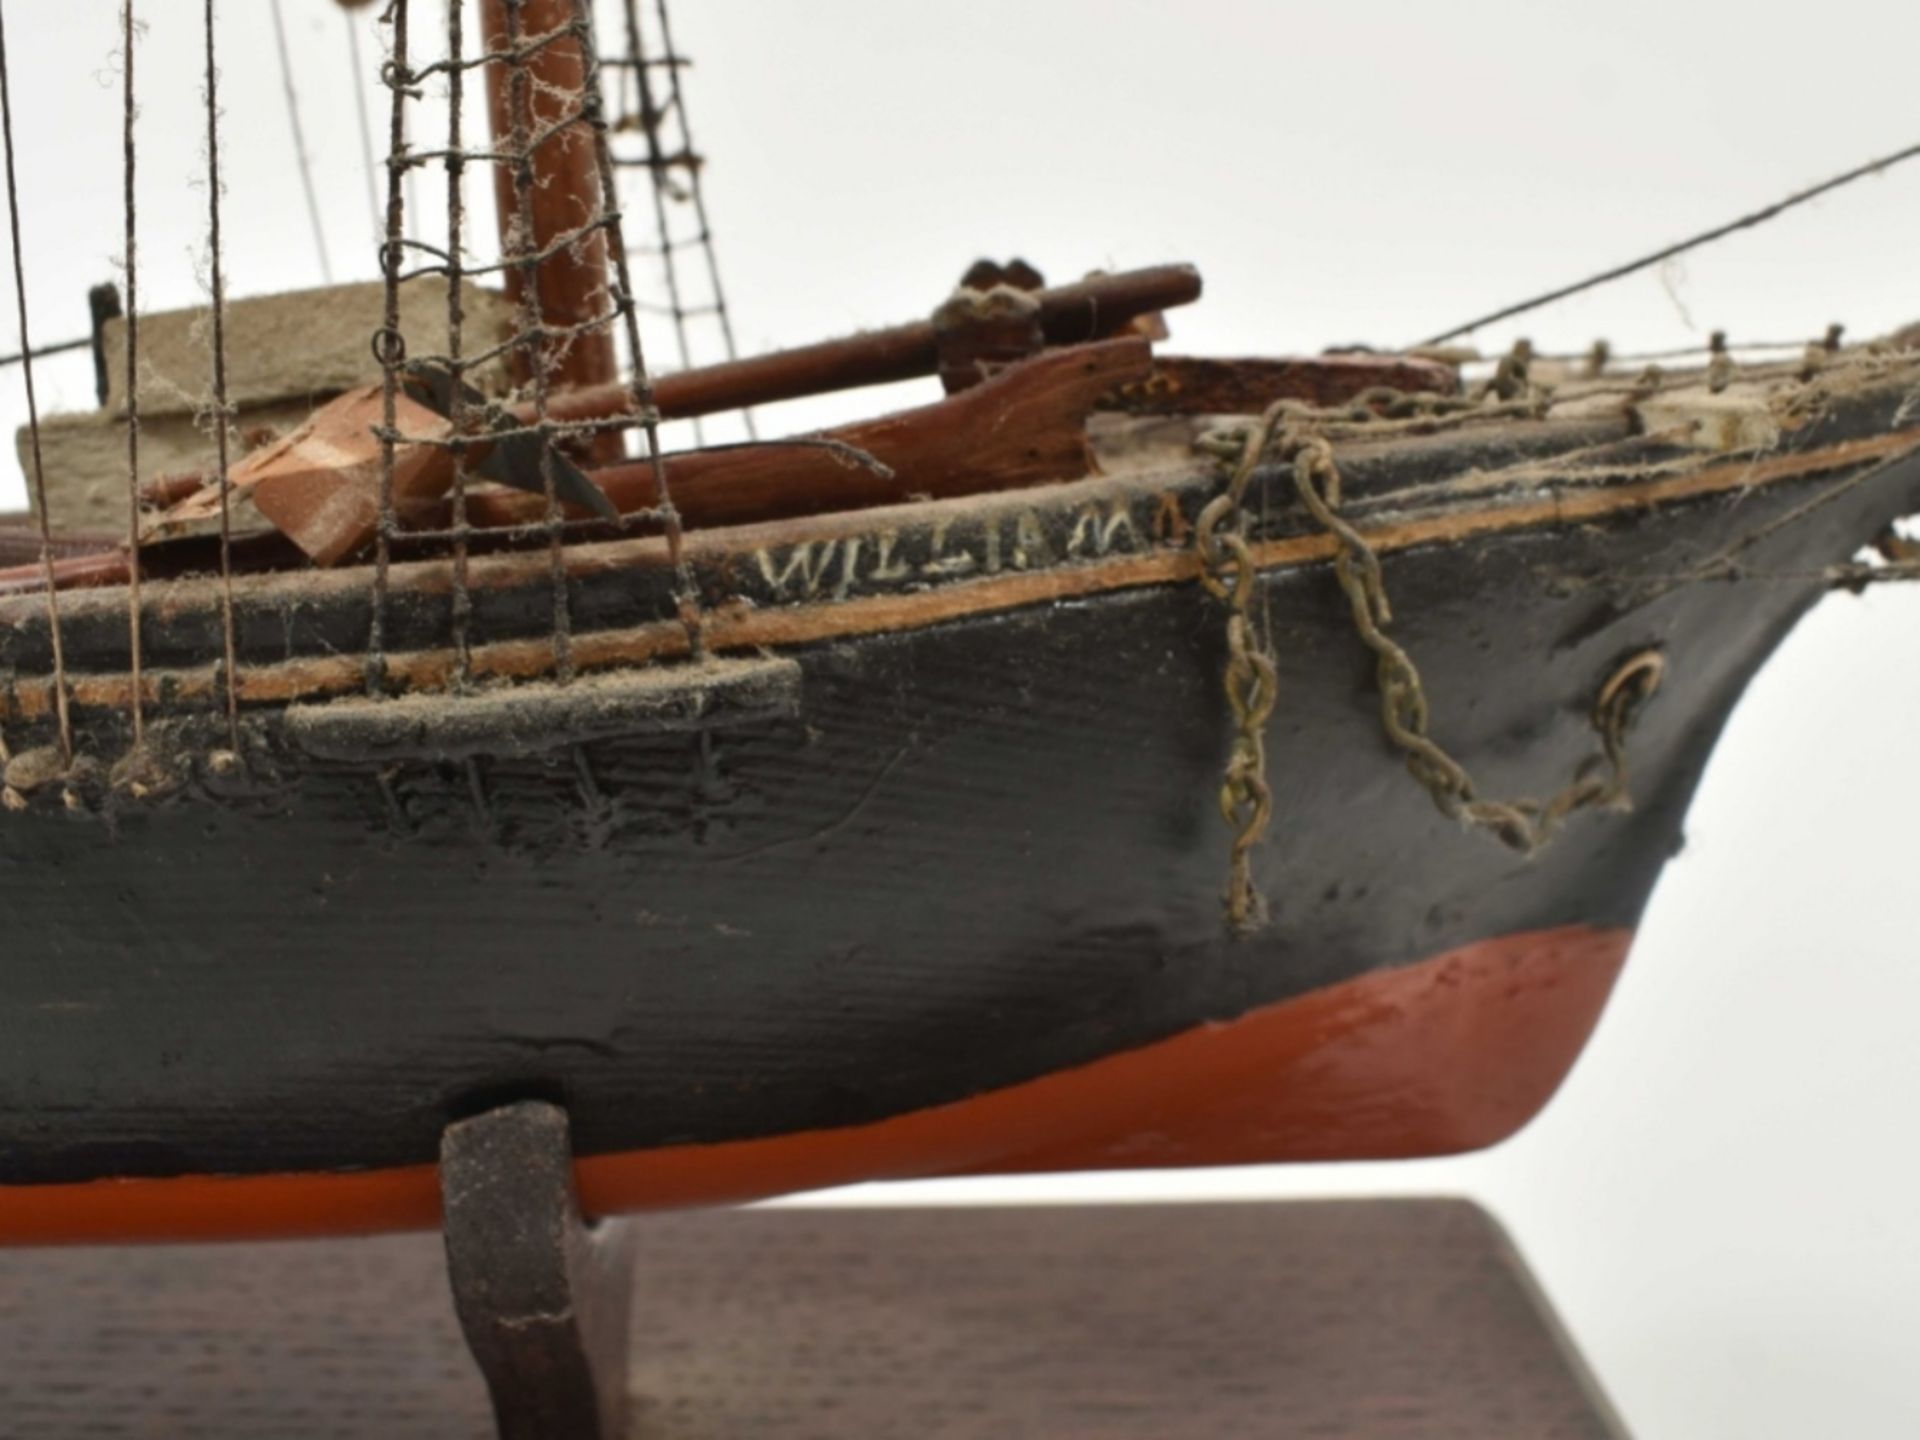 Historic model of 4 masted barque - Image 5 of 6